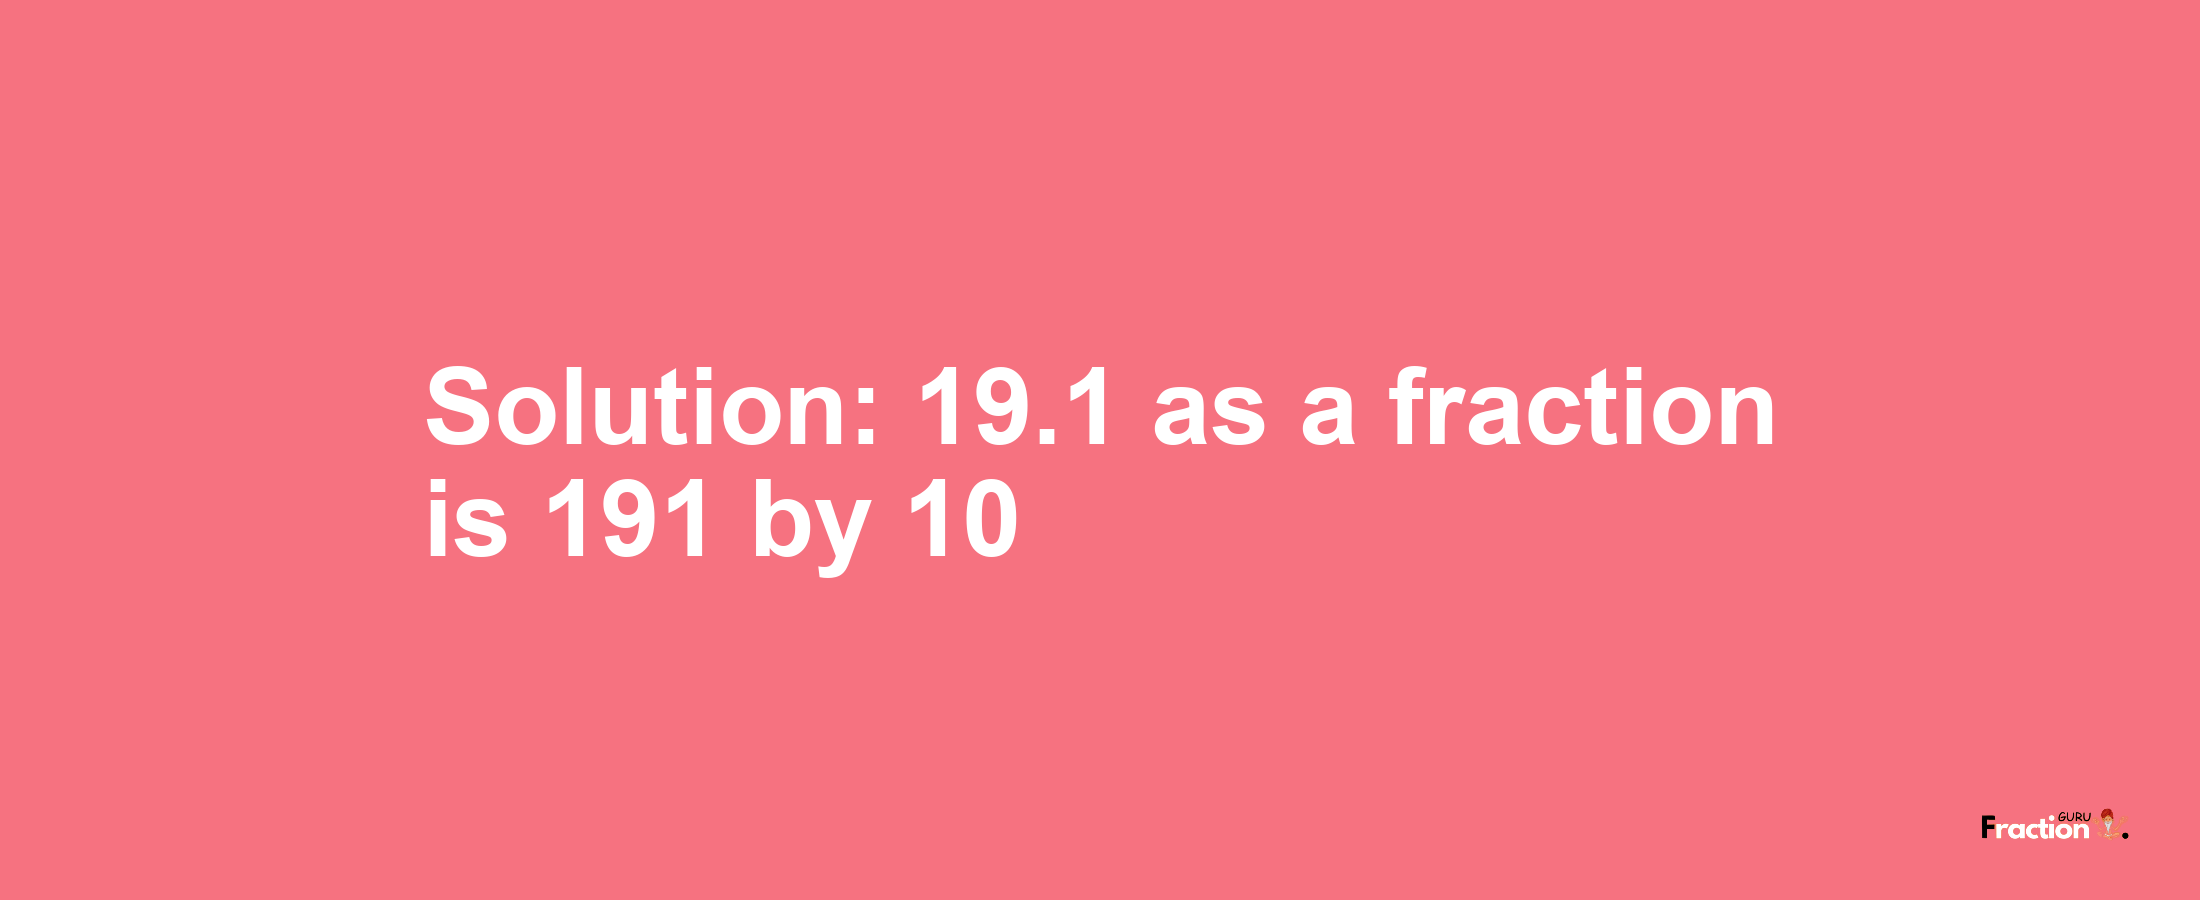 Solution:19.1 as a fraction is 191/10